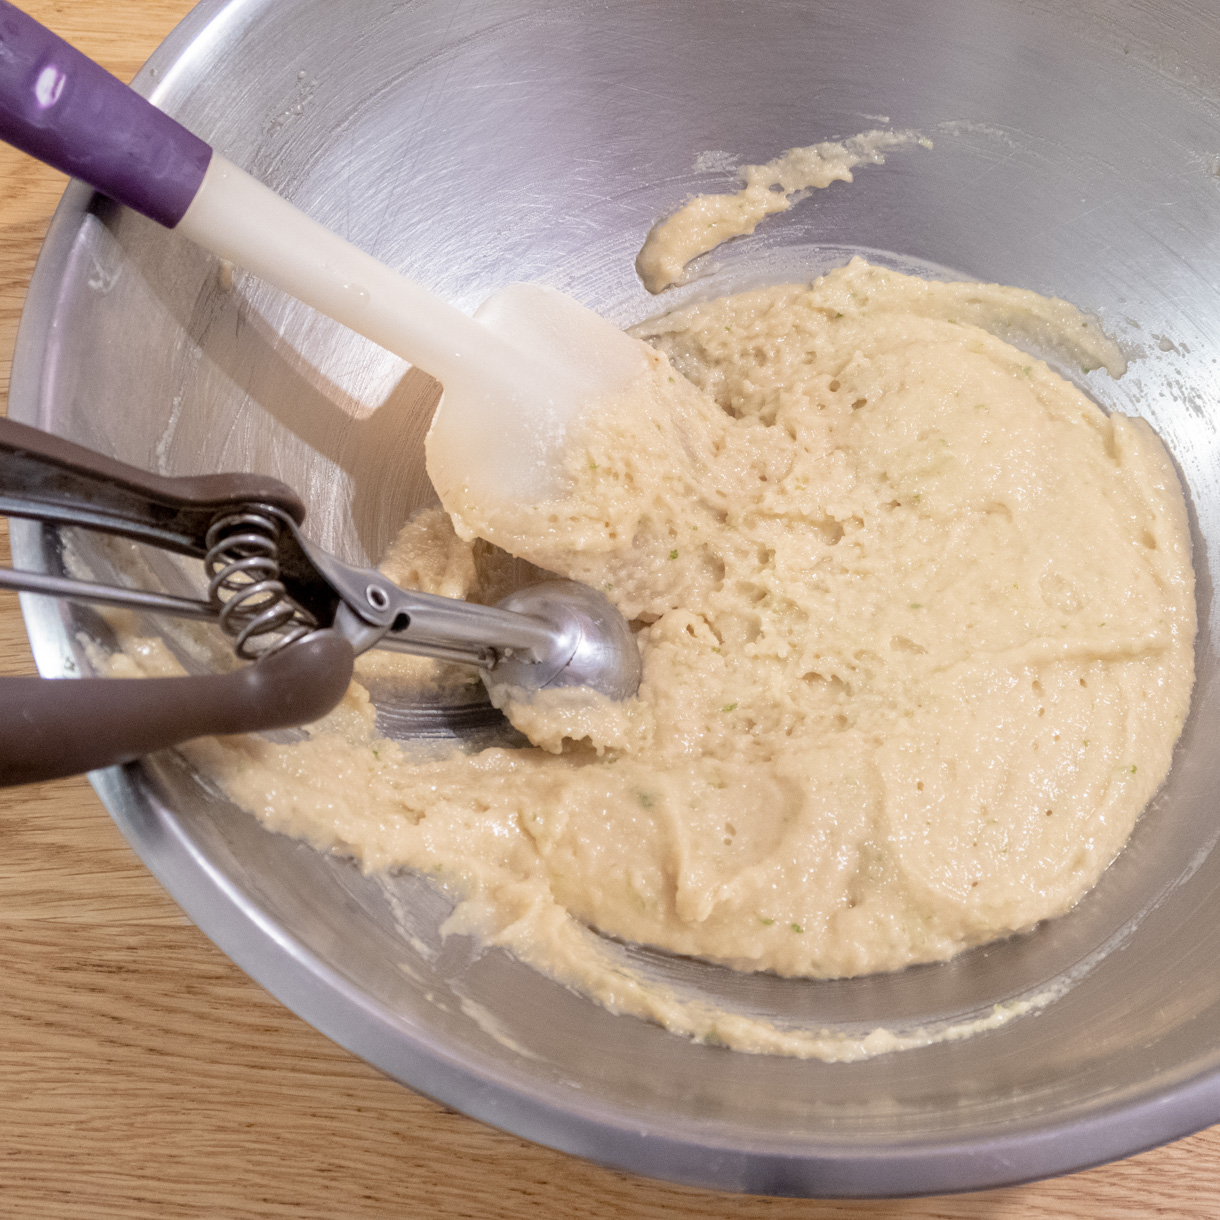 Finished financier batter in a large mixing bowl with a silicone spatule and small ice cream scoop in the bowl.